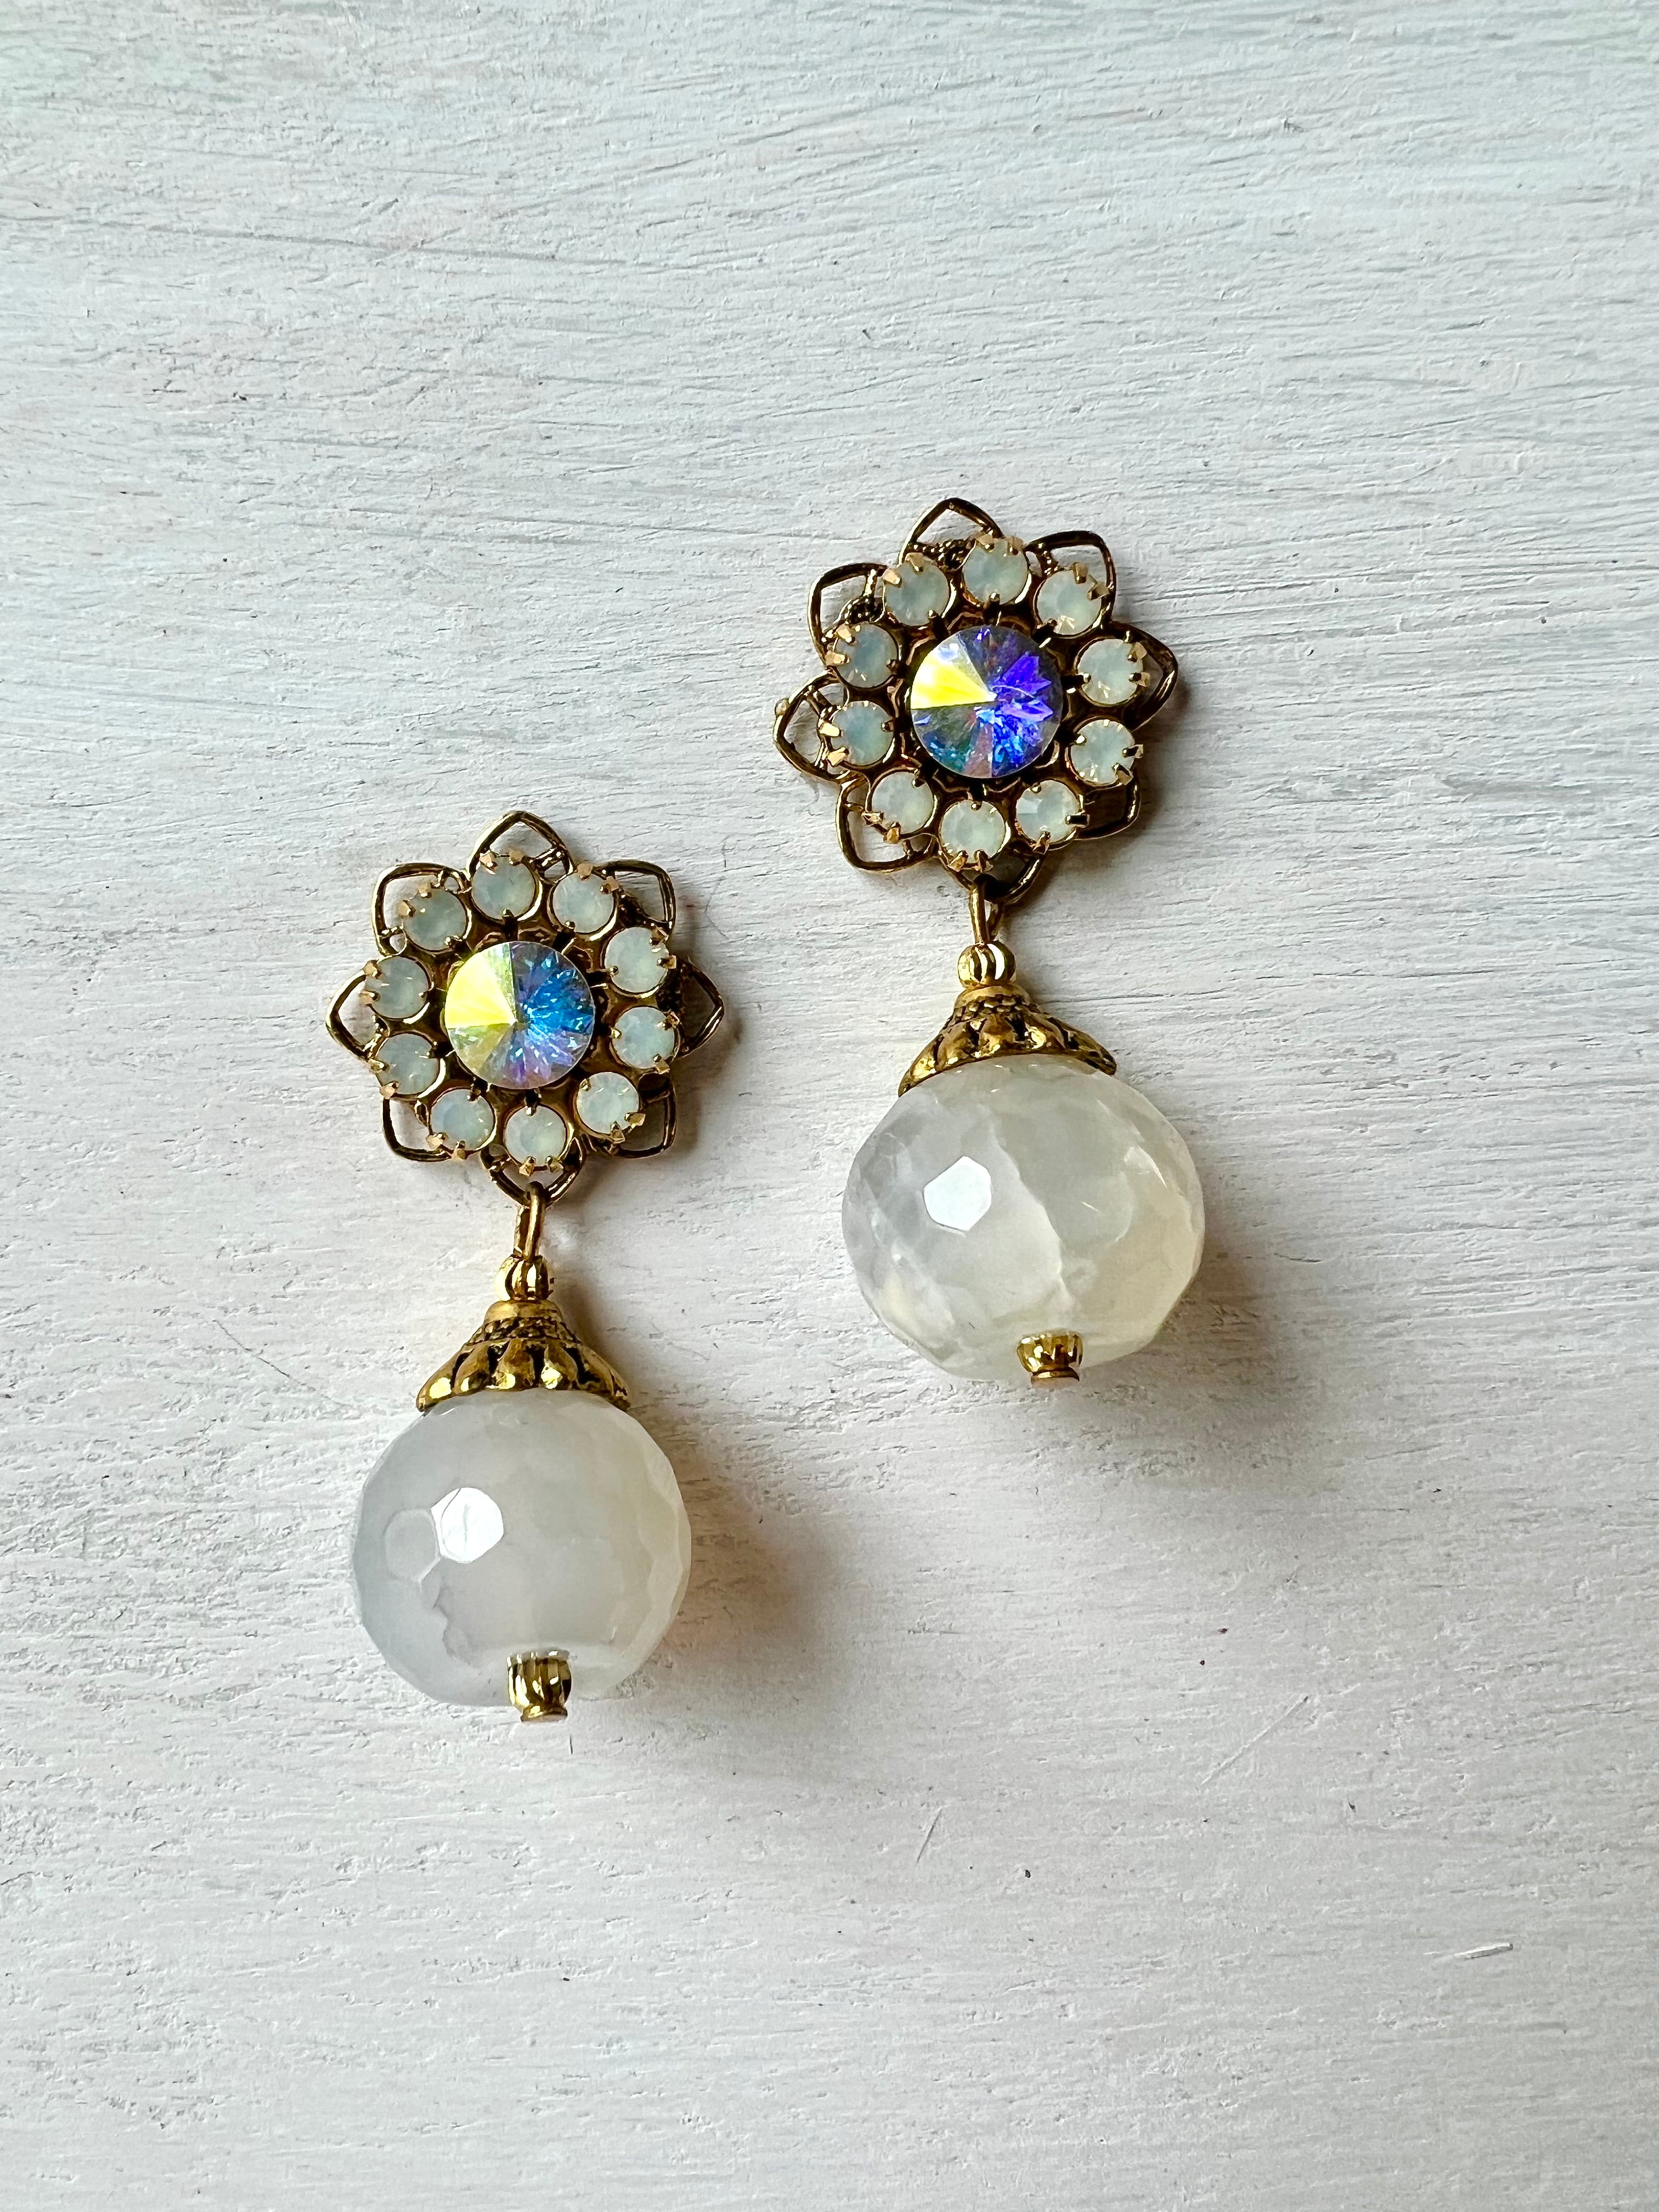 RGS-E060: Handcrafted Crystal Earrings